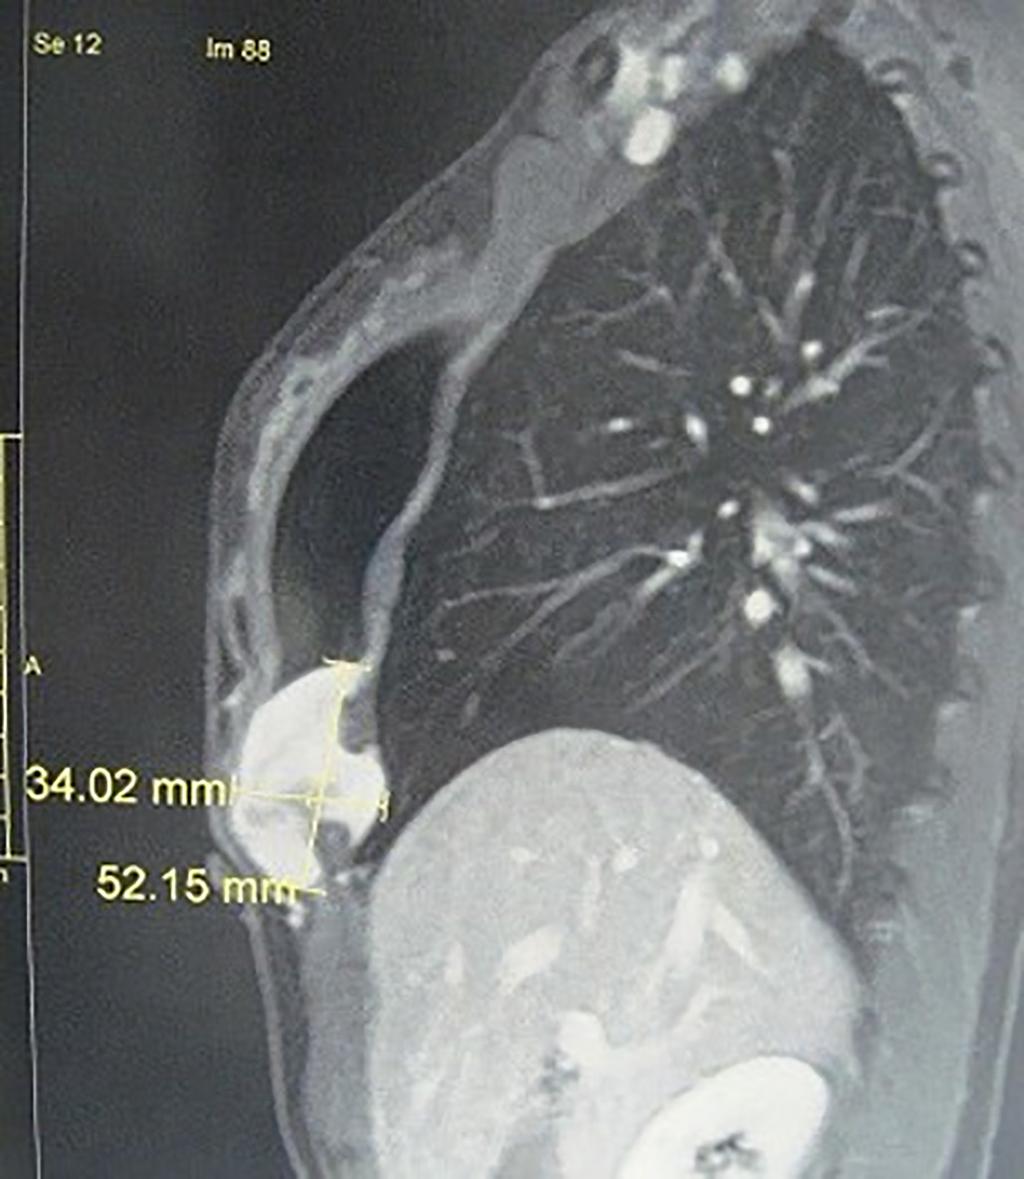 Case 3 Female, 38 years presented at the Hospital Júlia Kubitschek in Belo Horizonte, Minas Gerais, Brazil, on 08/18/2015, with a tumor in the right thoracic wall, measuring 9.3 x 4.8 x 4.